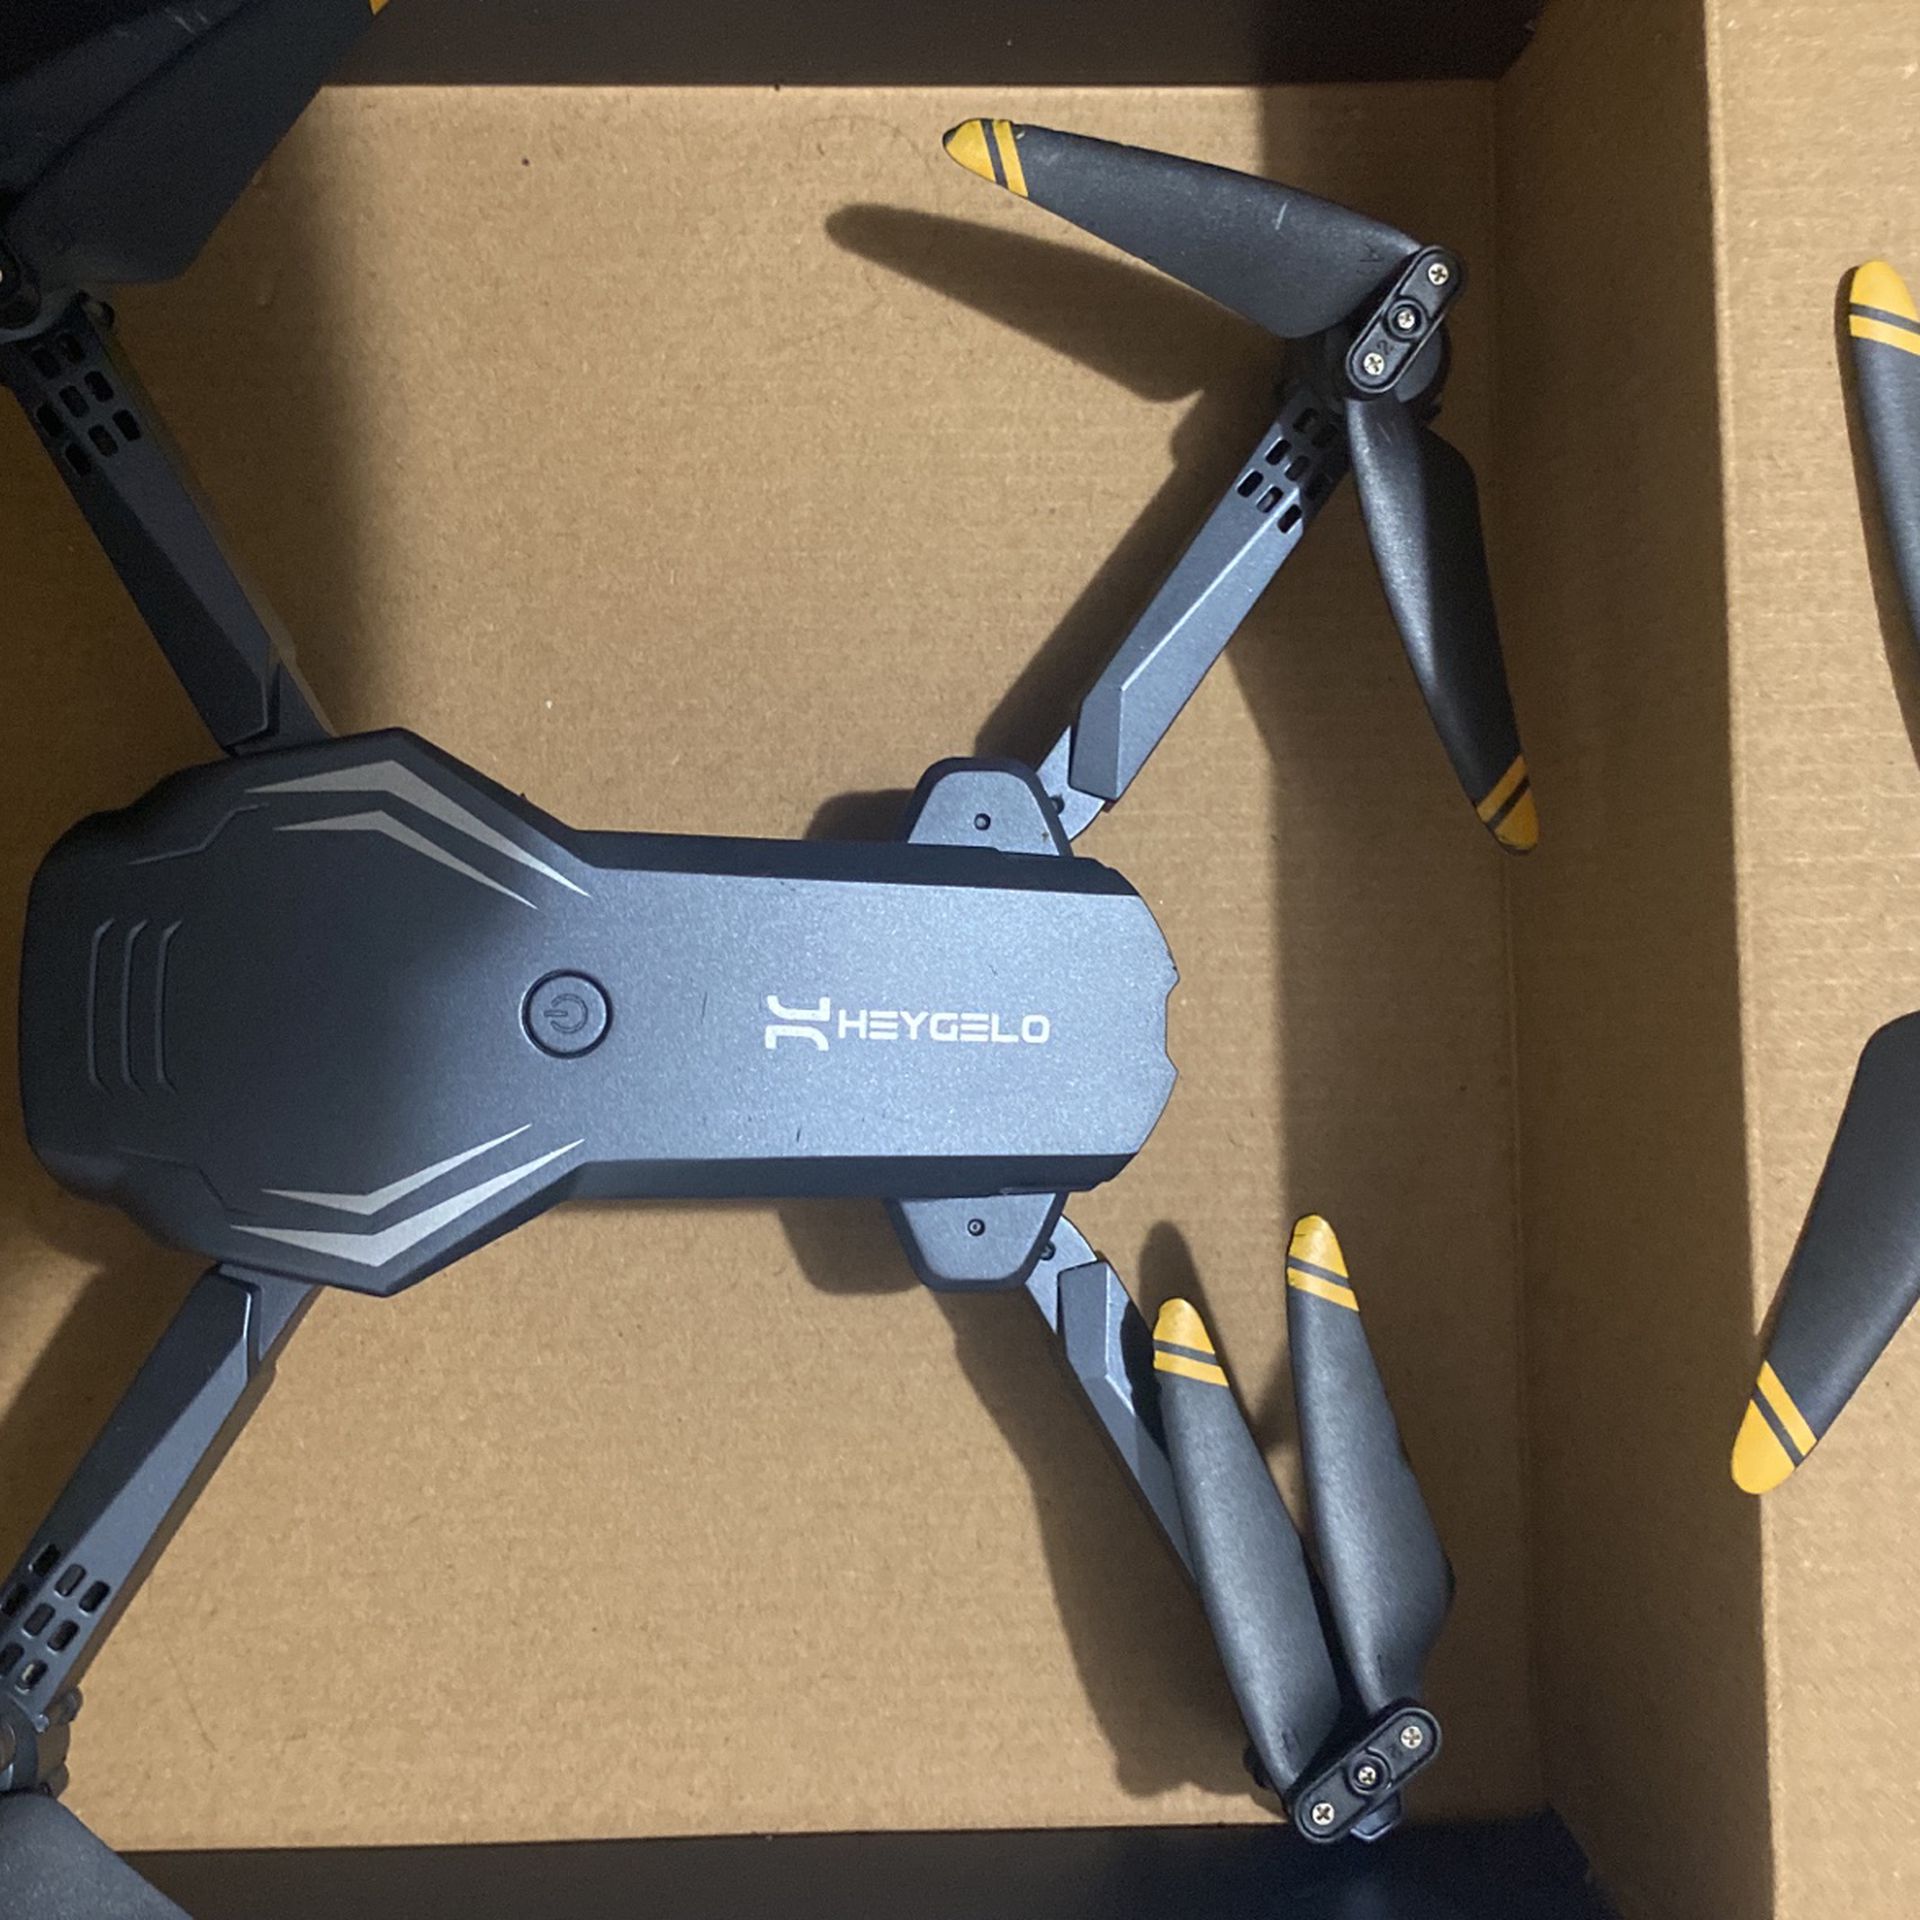 Heygelo Sirius Drone for Sale in Fresno, TX - OfferUp